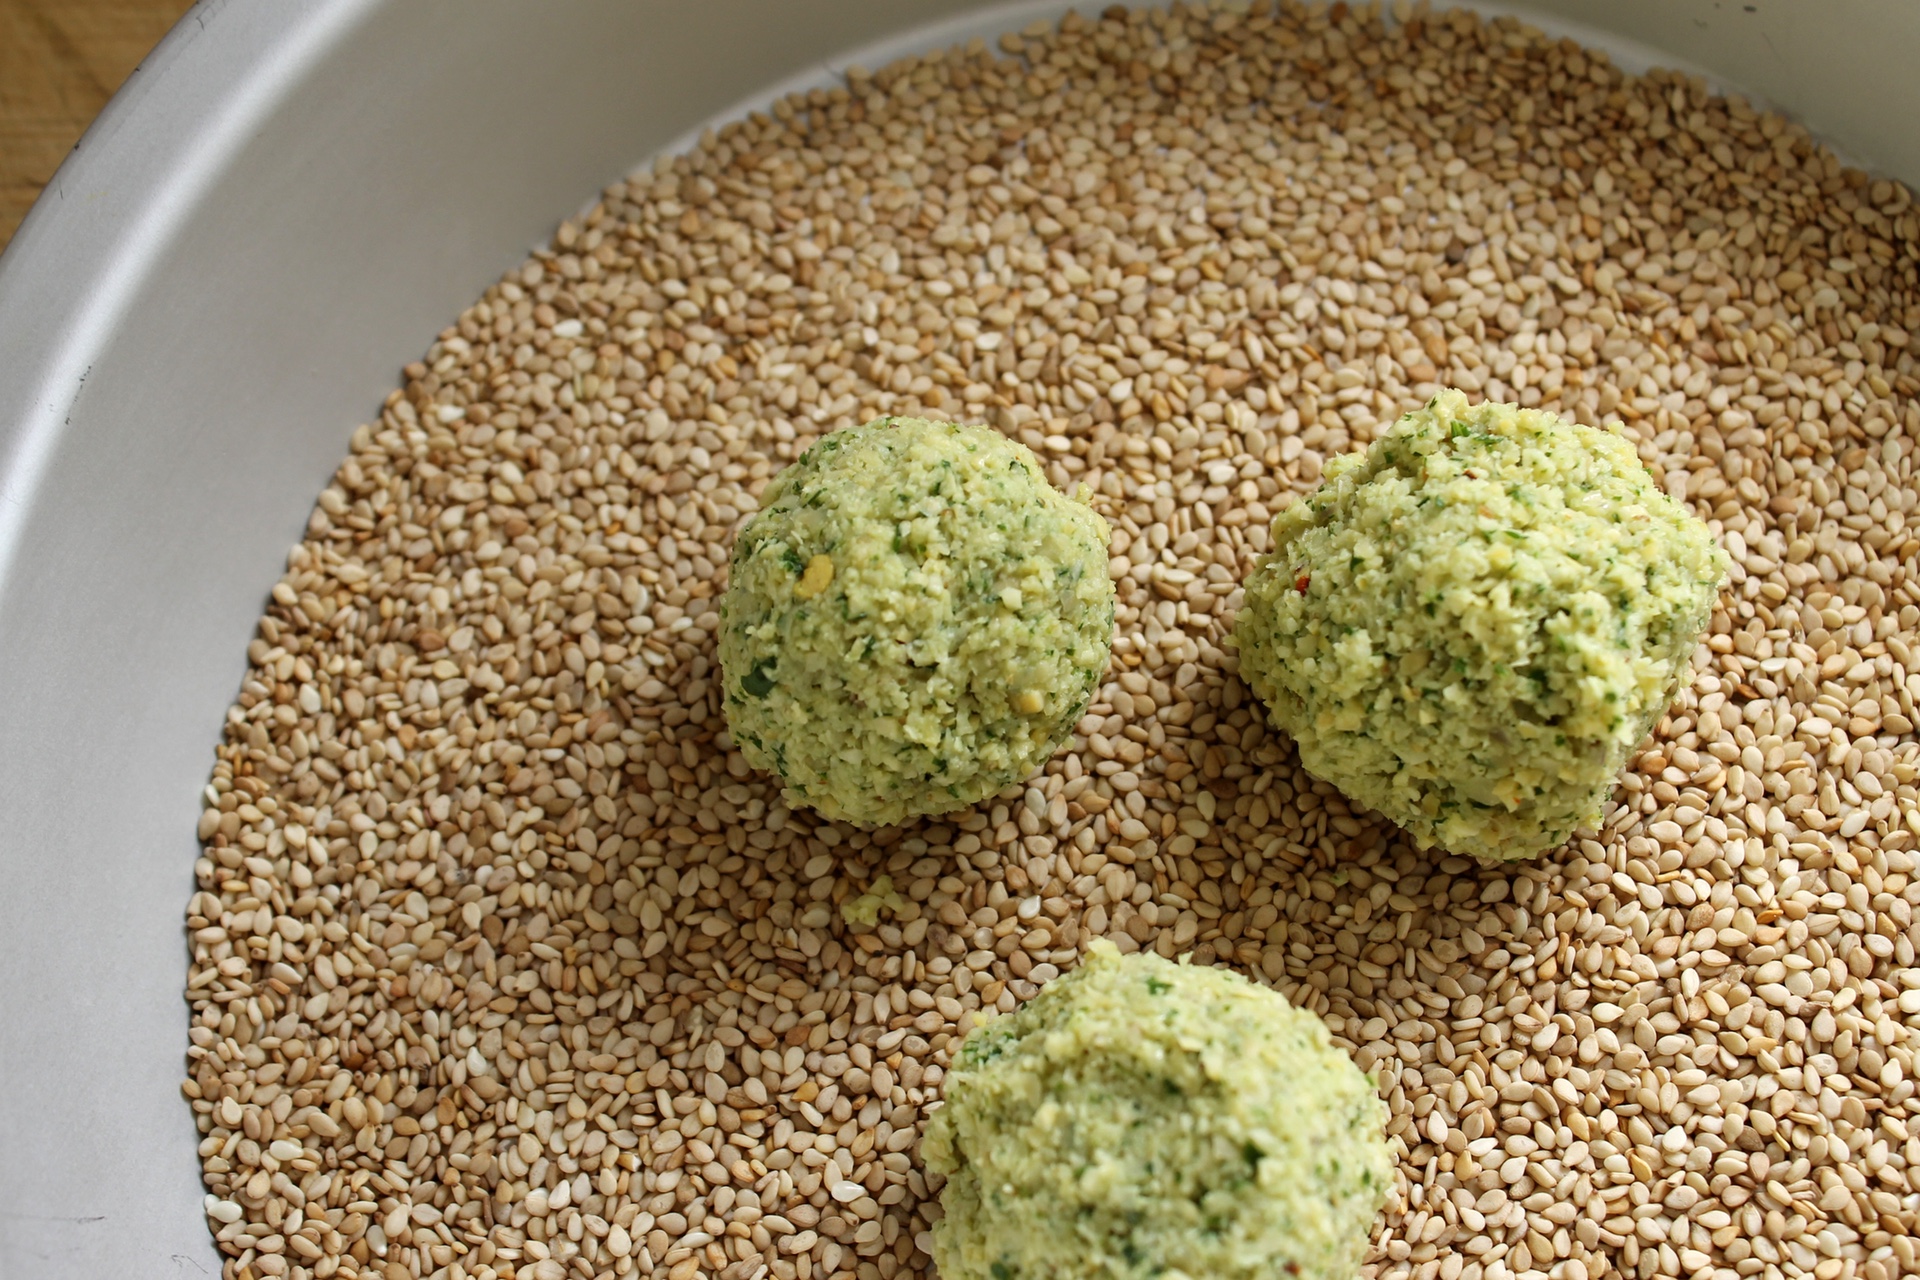 Roll the falafel balls in sesame seeds for extra crunch and color.